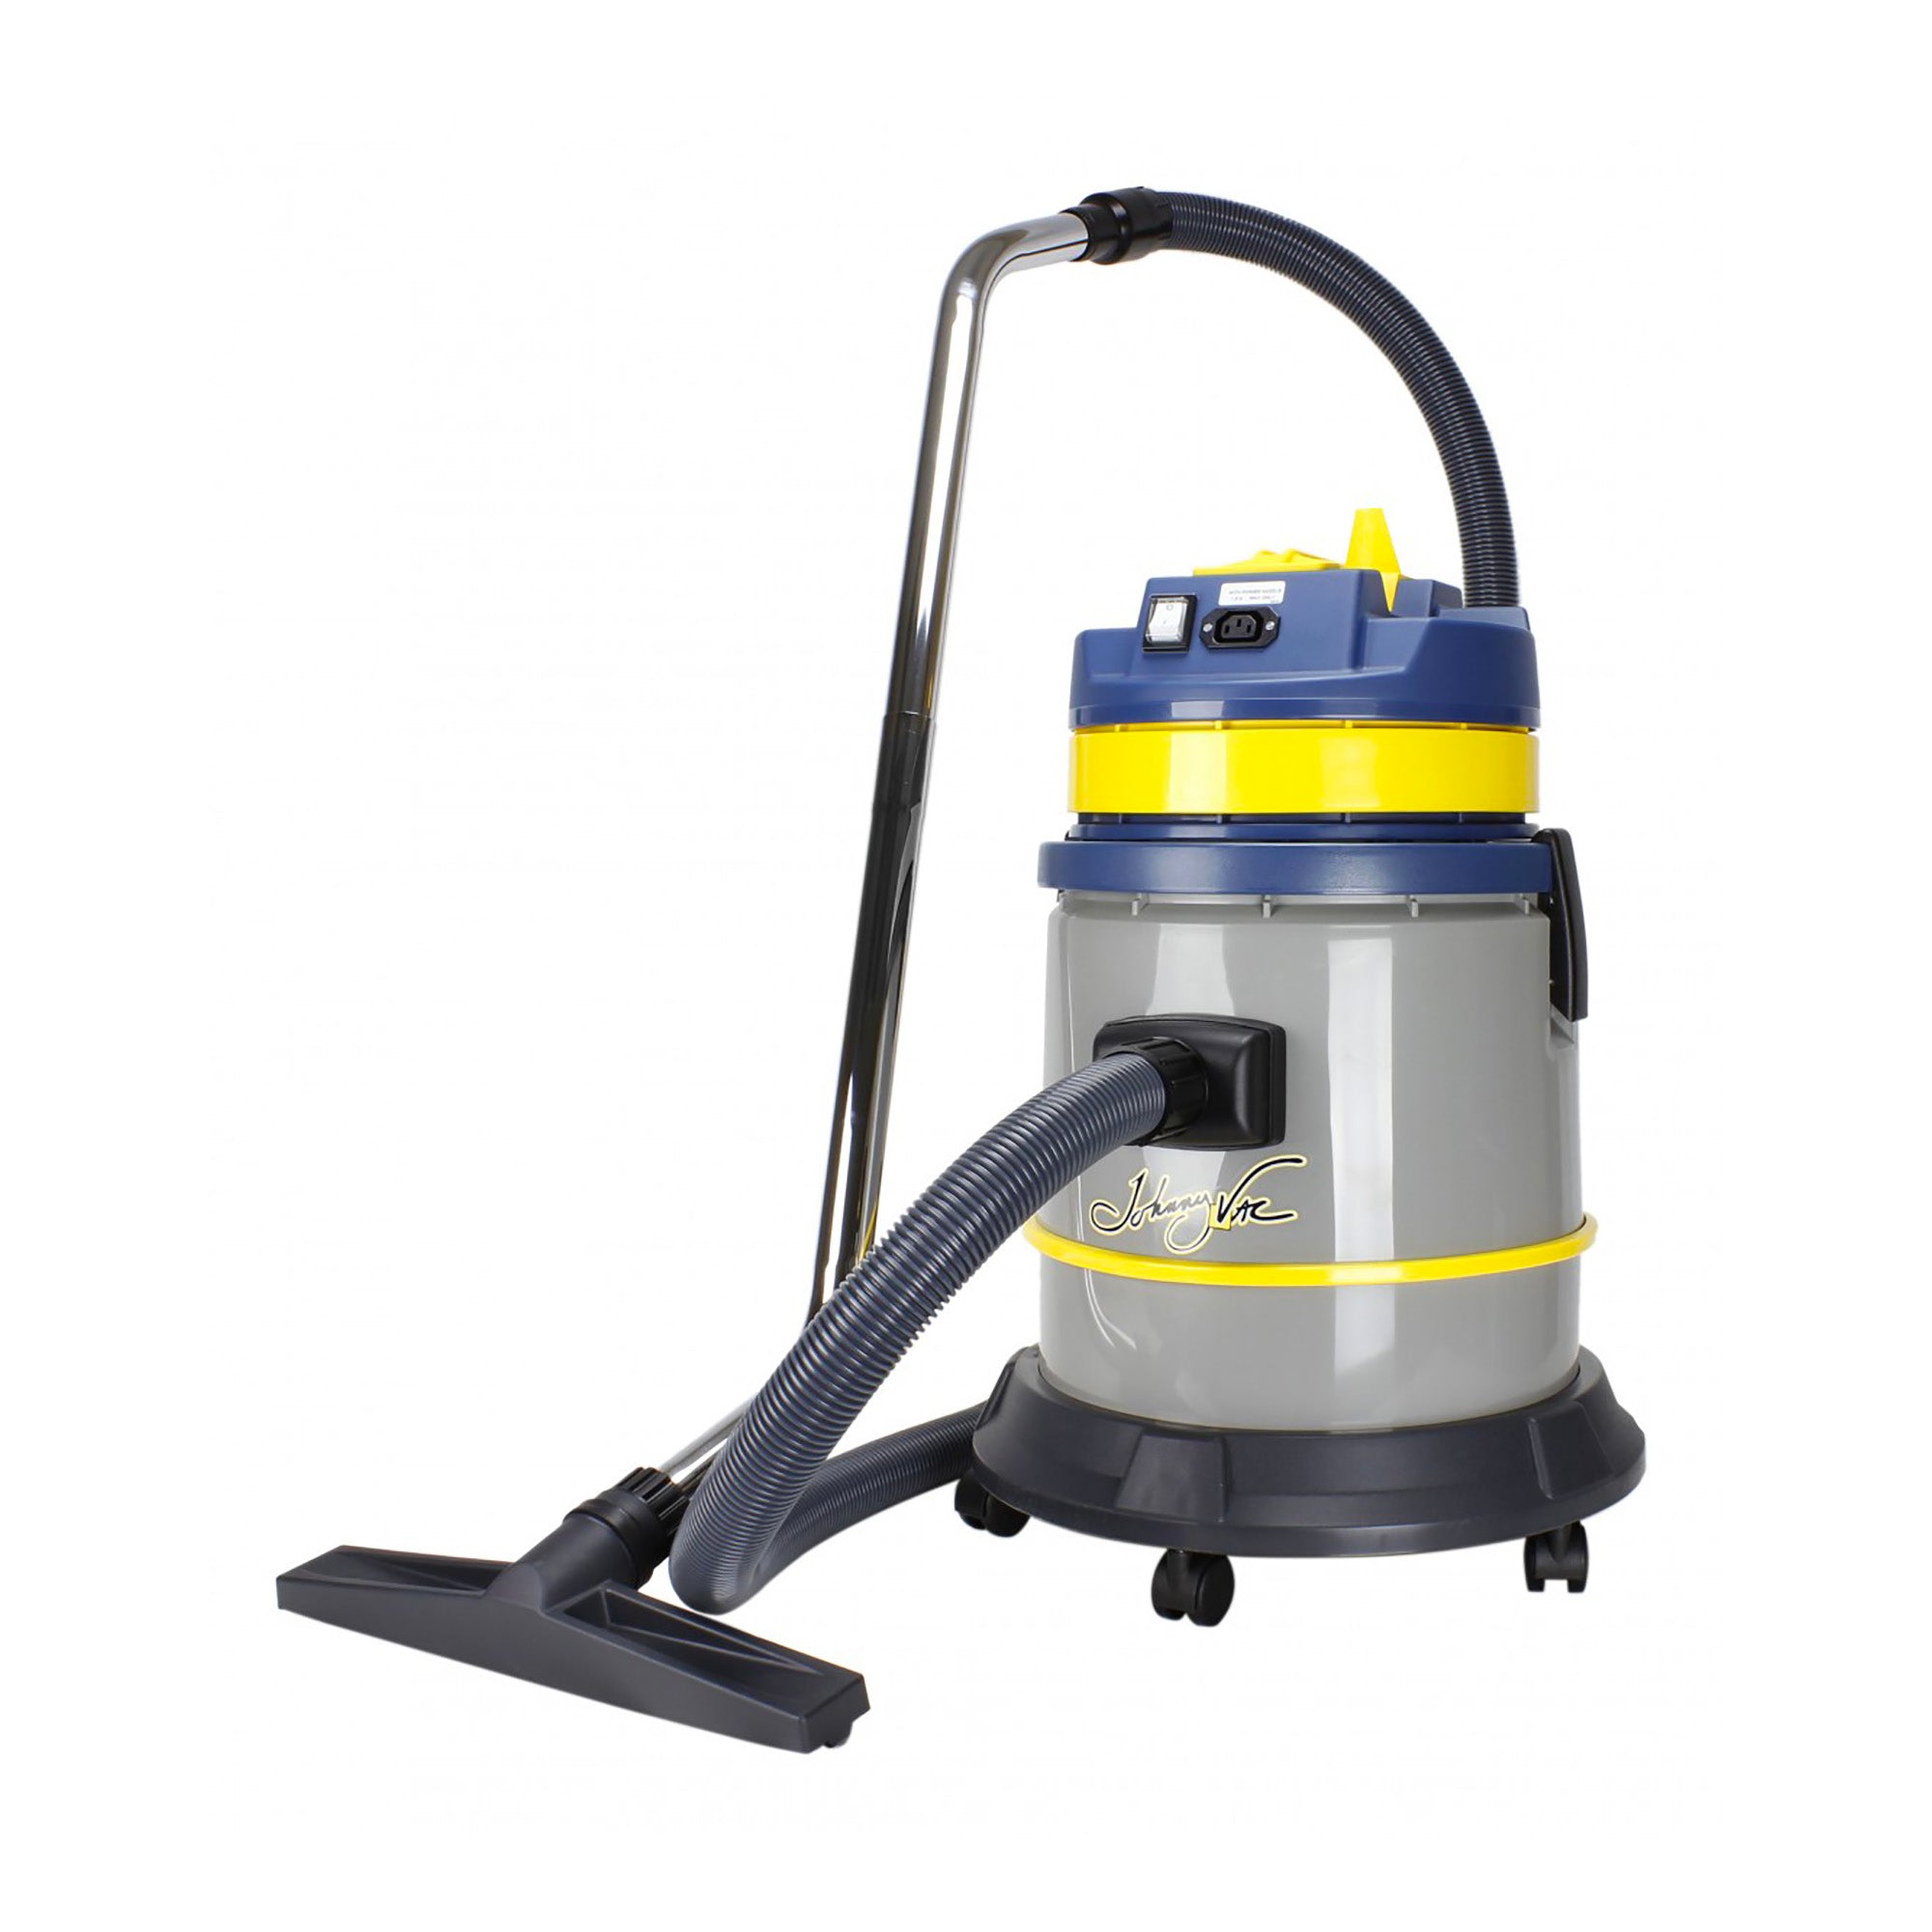 Johnny Vac JV315 Wet Dry Commercial Canister Vacuum